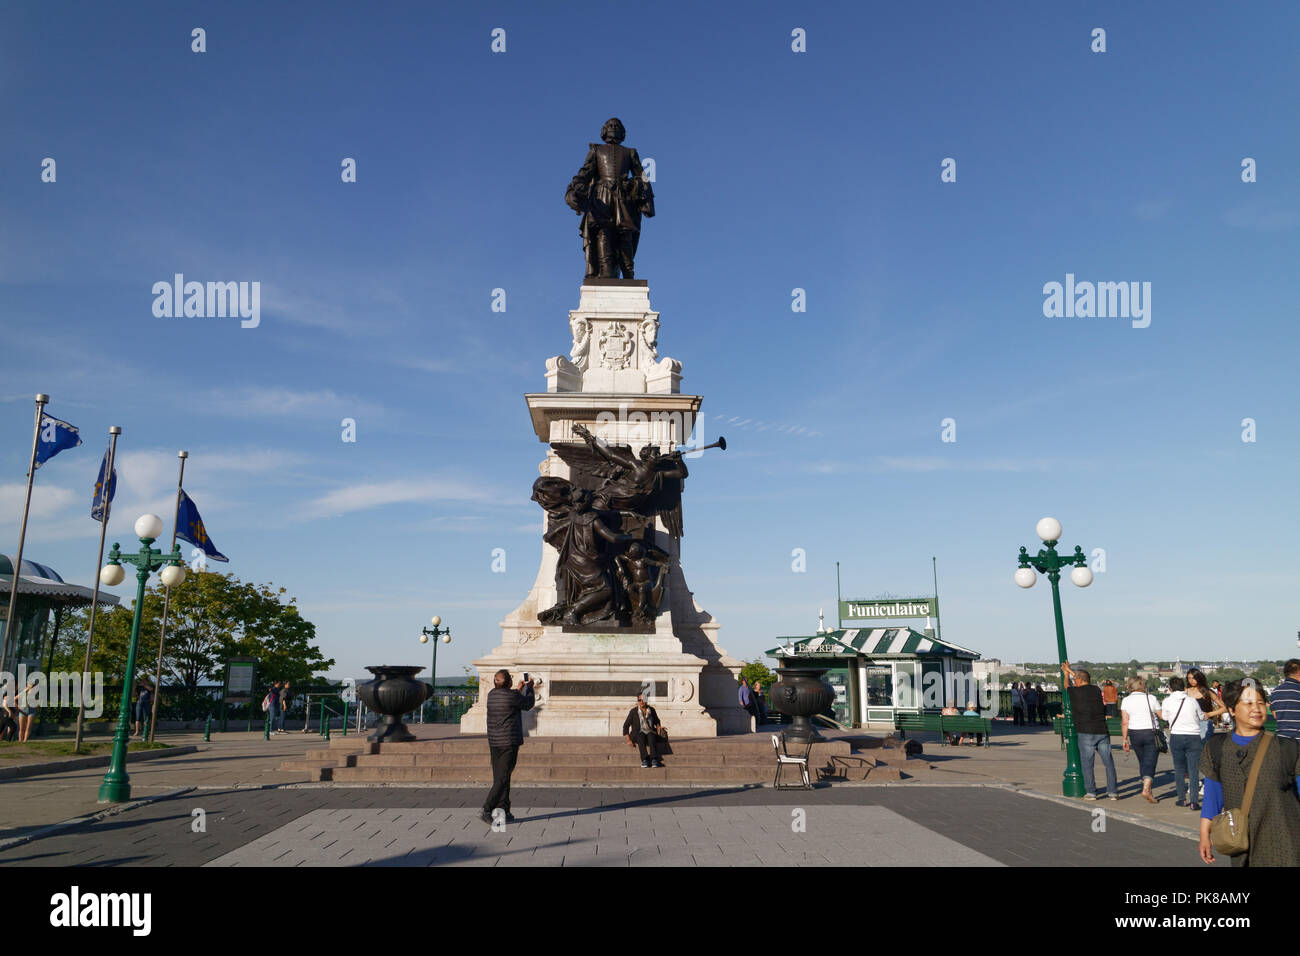 A tourist taking a photo of the statue of Samuel de Champlain on the Terrasse Dufferin, Quebec City, Canada Stock Photo